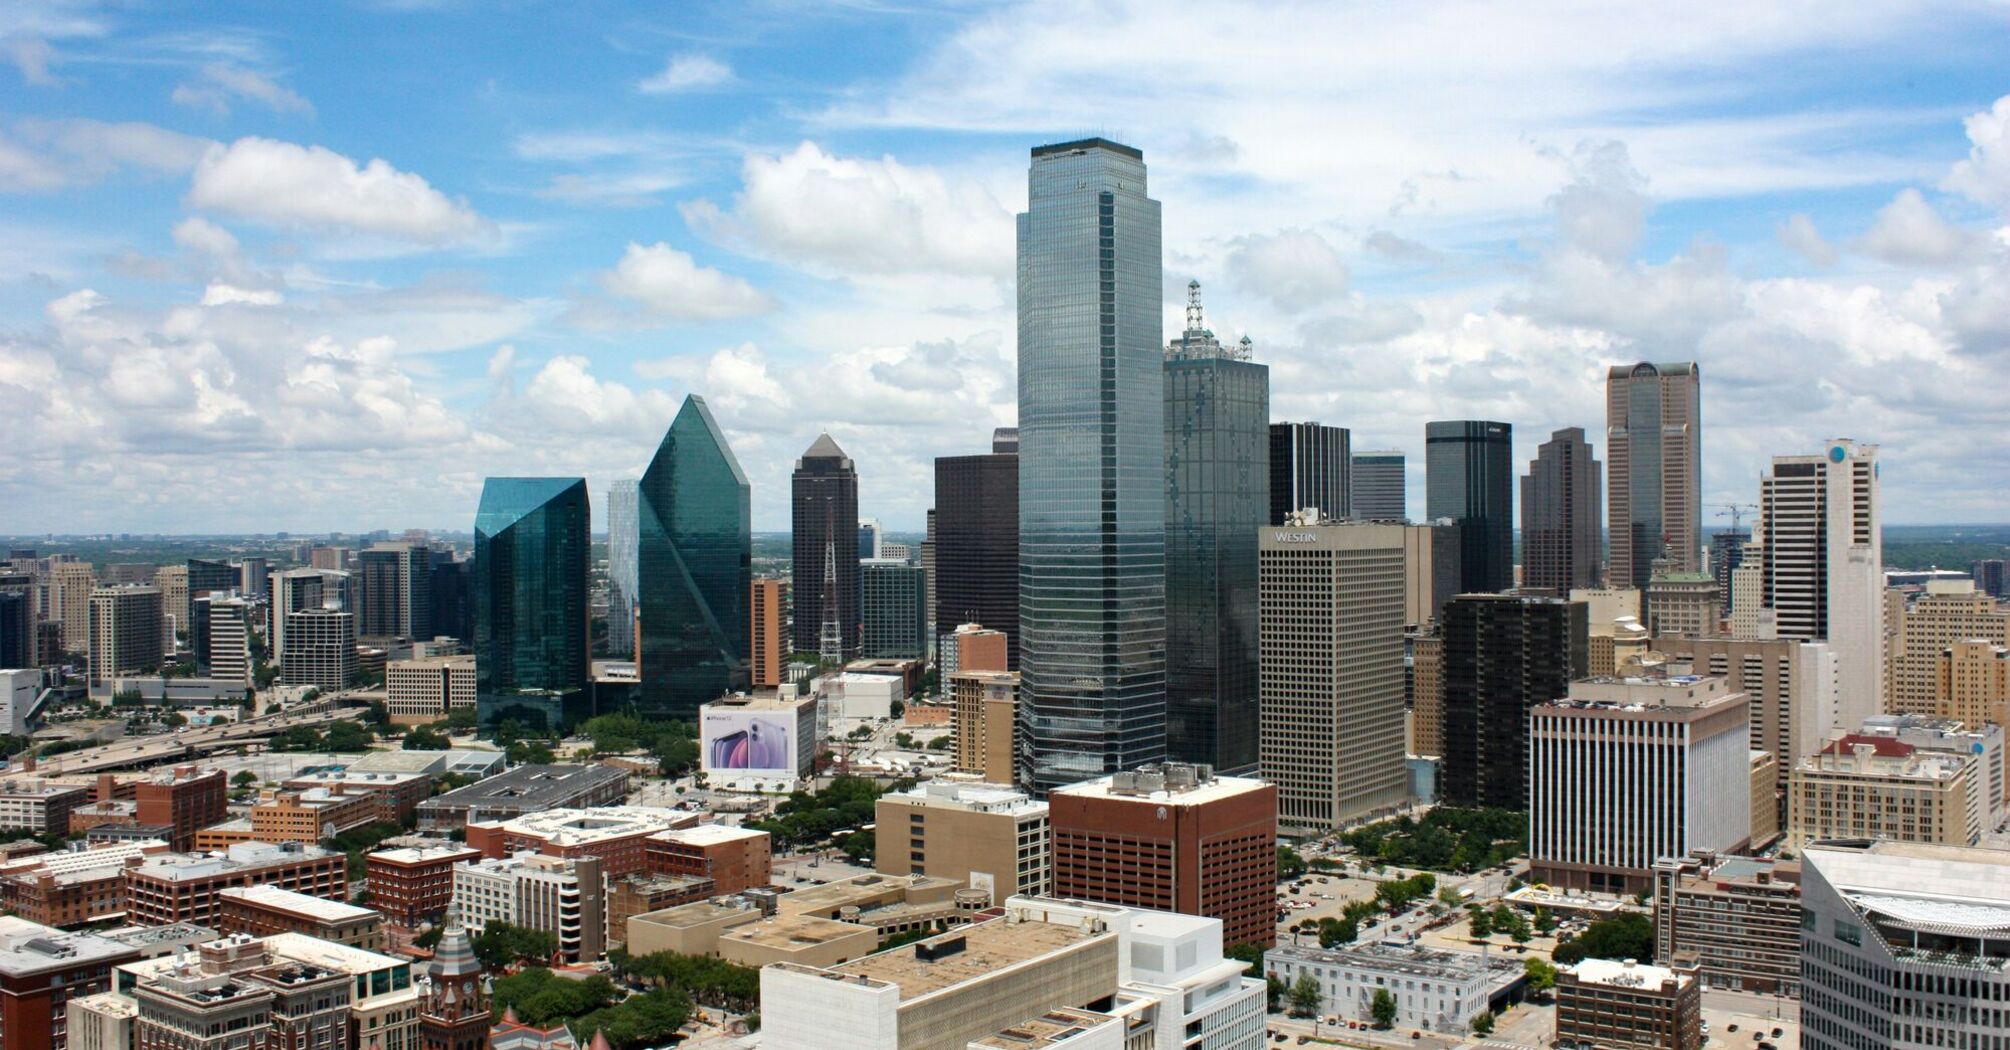 A daytime skyline view of Dallas, Texas, showcasing reflective skyscrapers, diverse architecture, and scattered clouds above